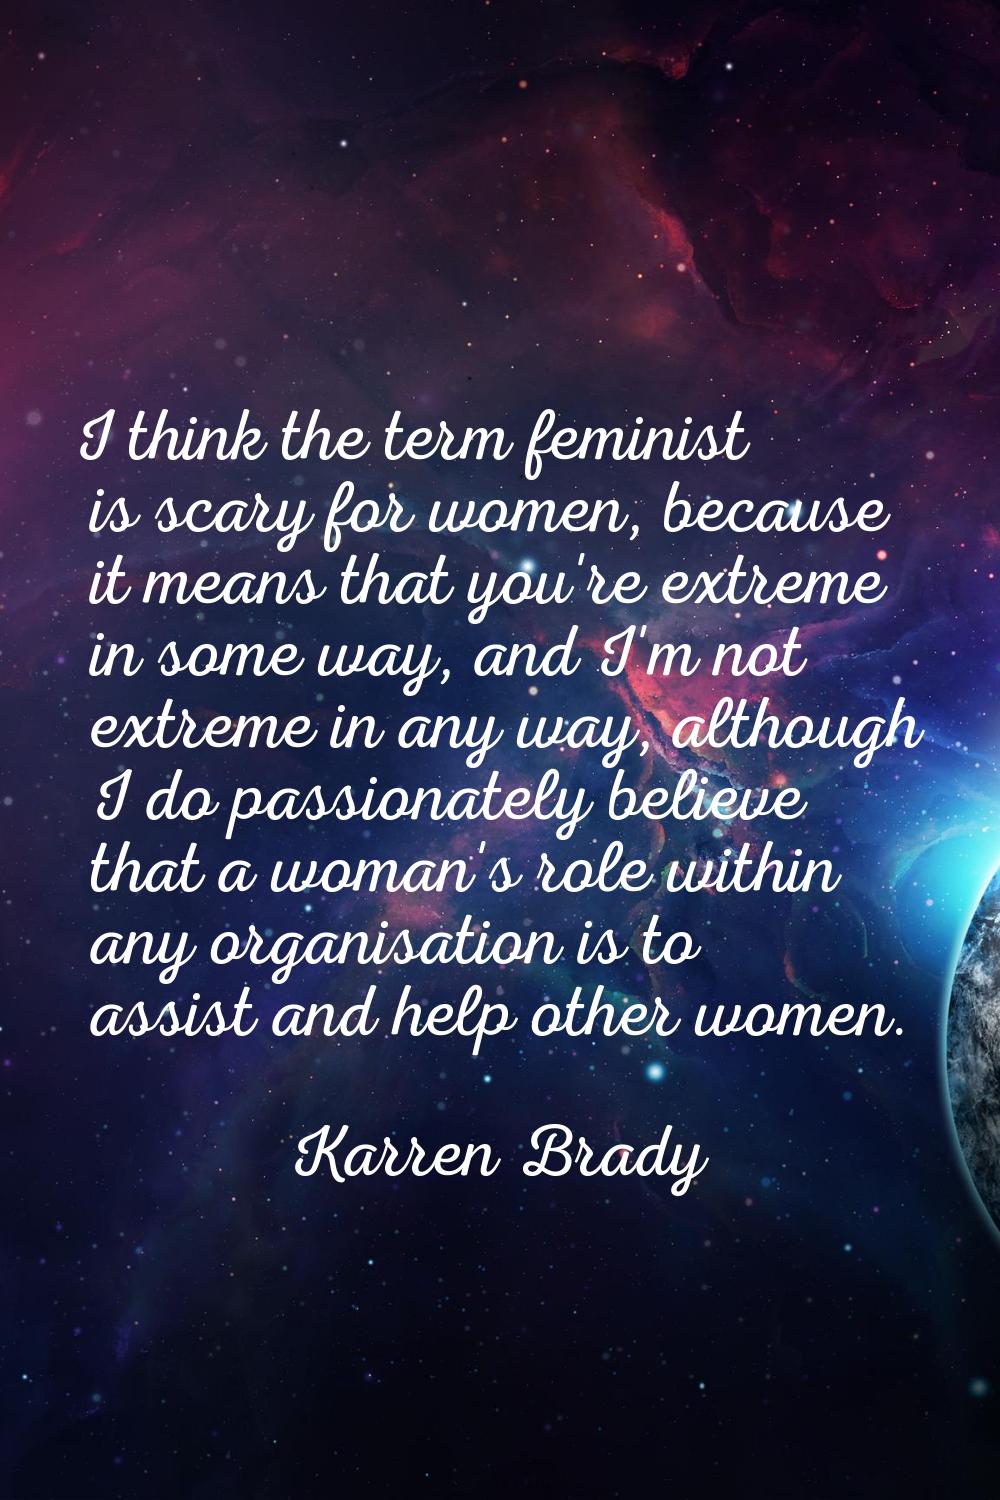 I think the term feminist is scary for women, because it means that you're extreme in some way, and